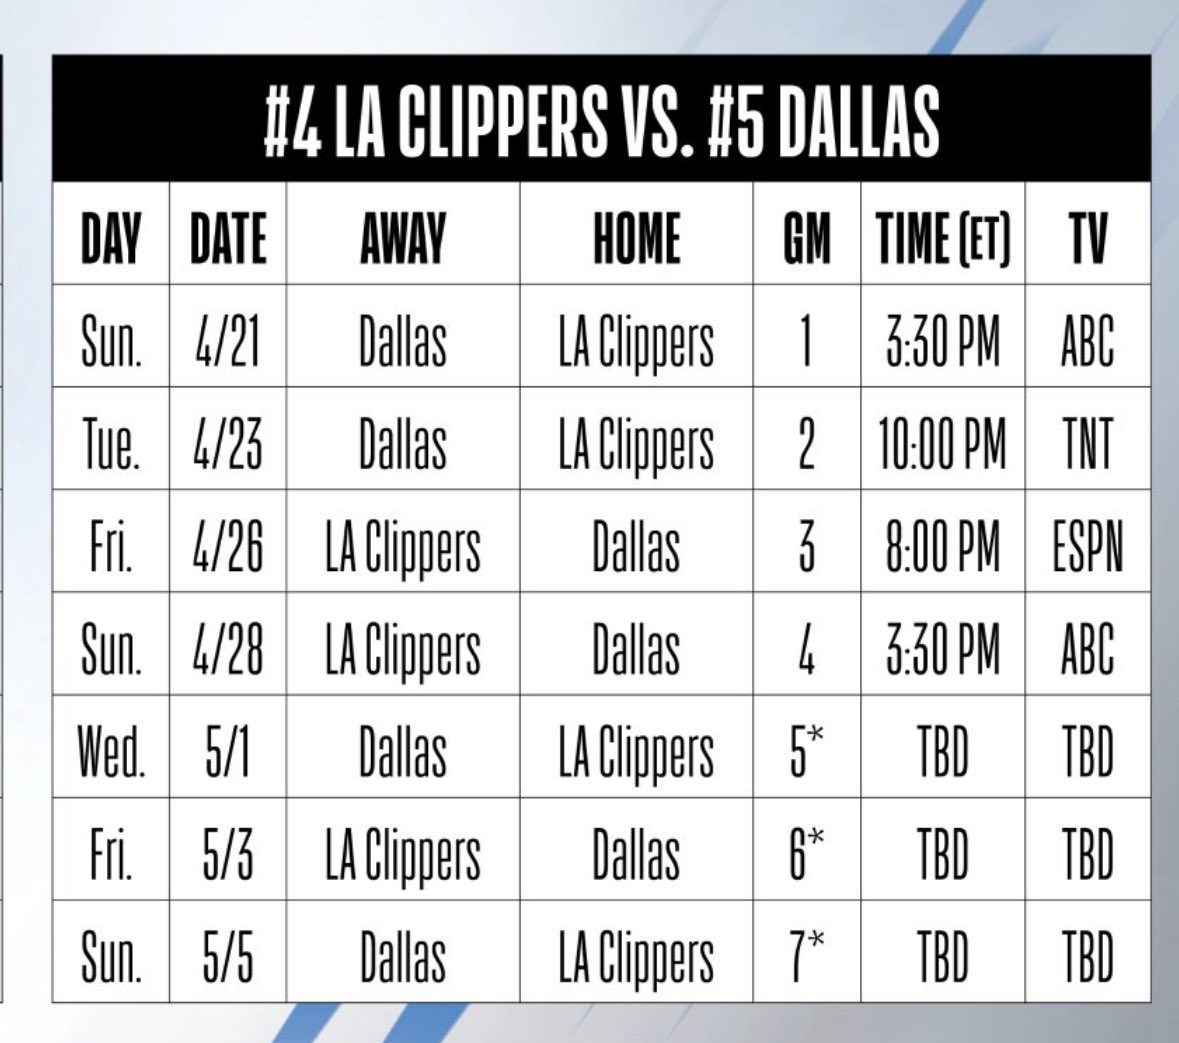 Mavs-Clippers first round series schedule